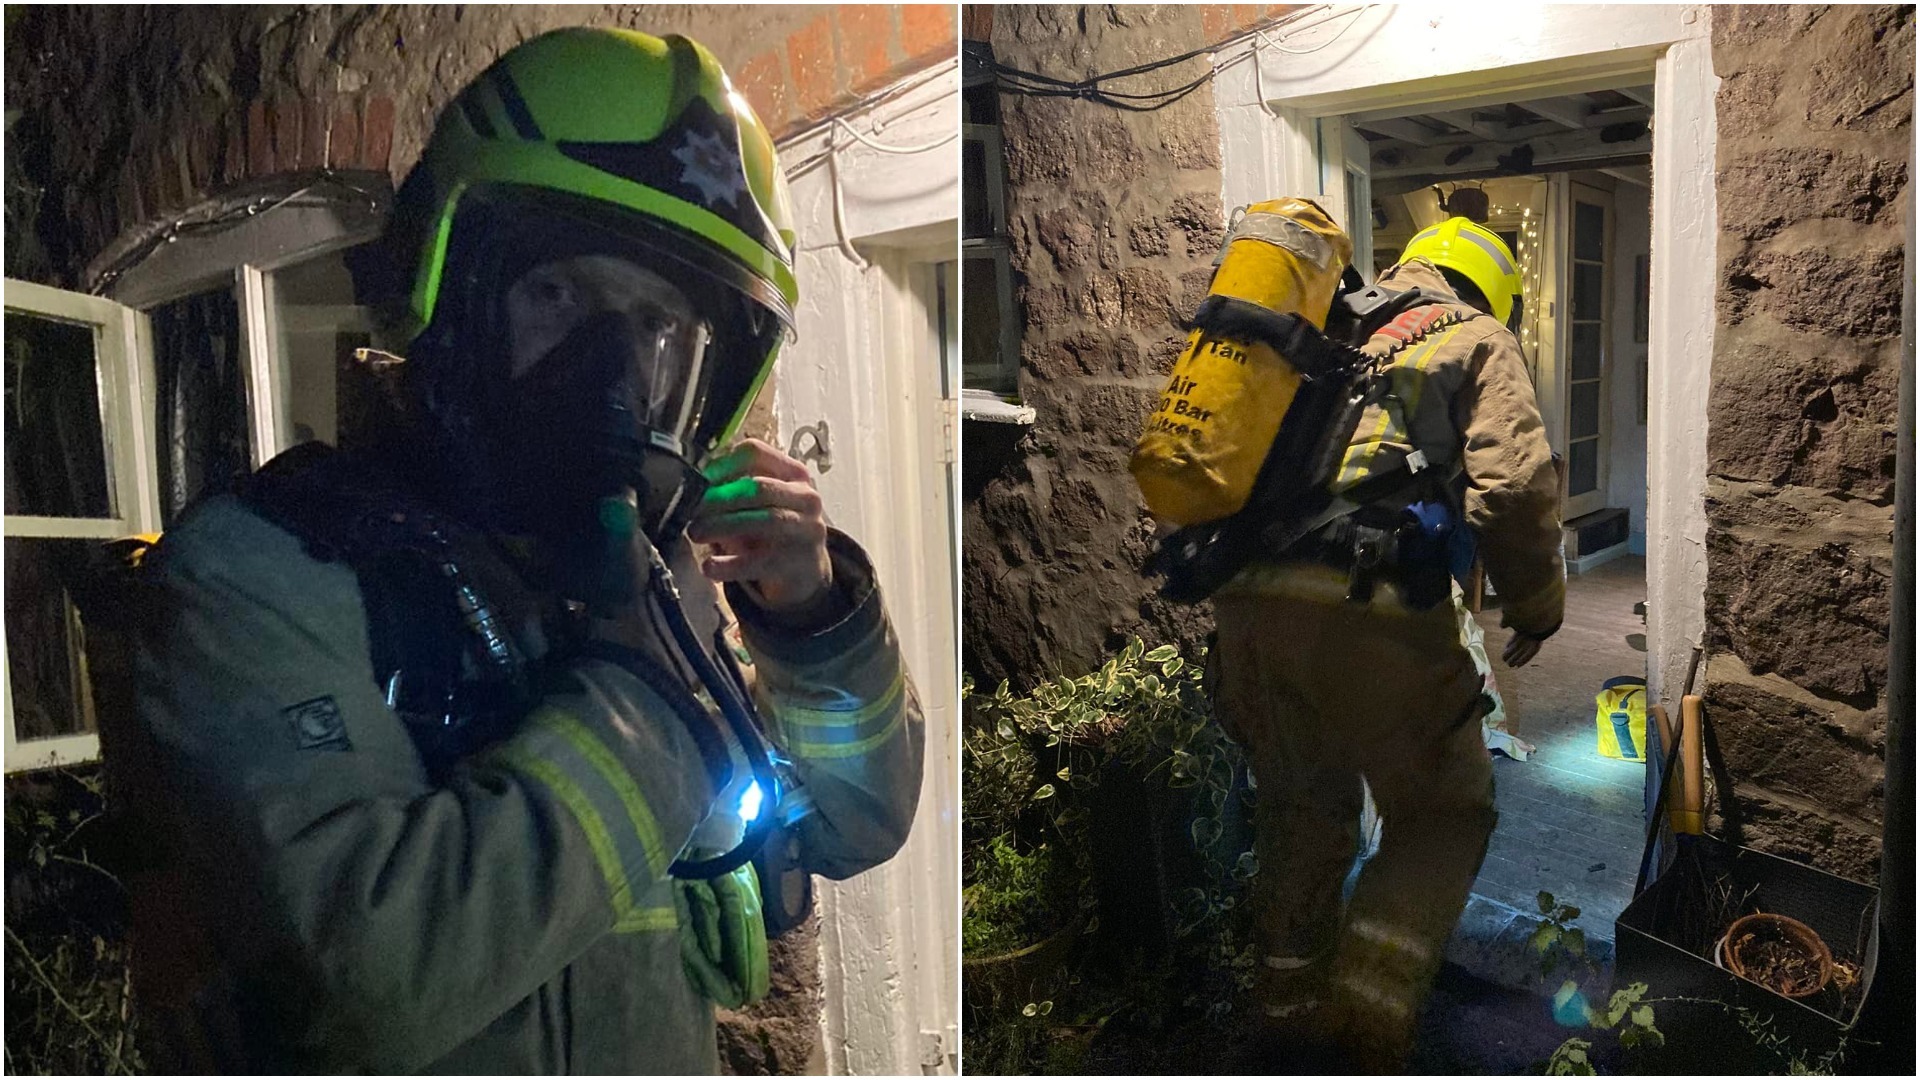 A firefighterfrom Llanfair Caereinion Station enters a property with high levels of carbon monoxide in the Guilsfield area. Pictures by Joy Hopson